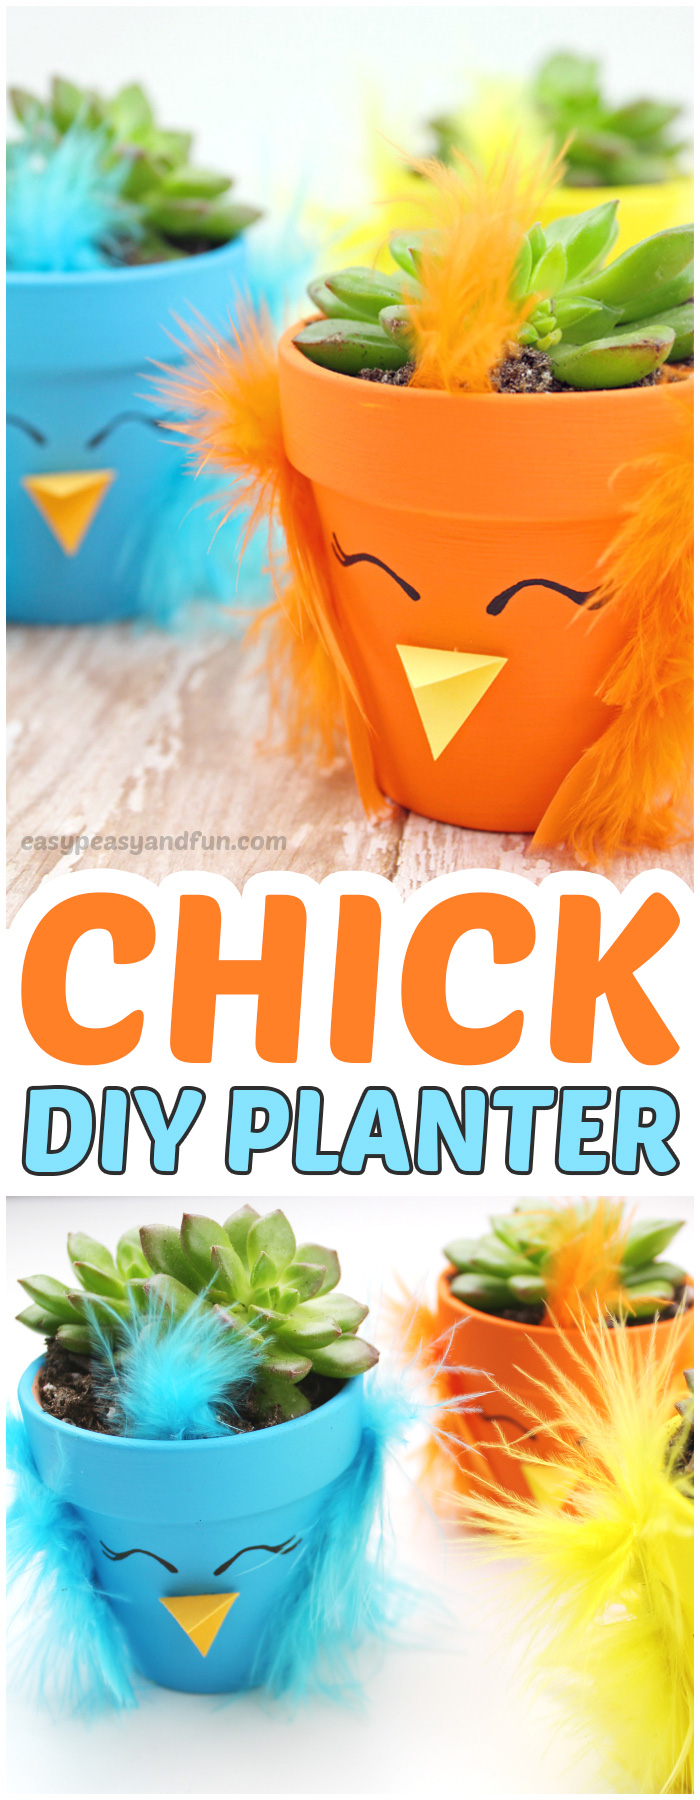 DIY Easter Chick Growers.  A very fun craft activity for kids this Easter.  #Crafts for kids #Easter crafts #Activities for kids